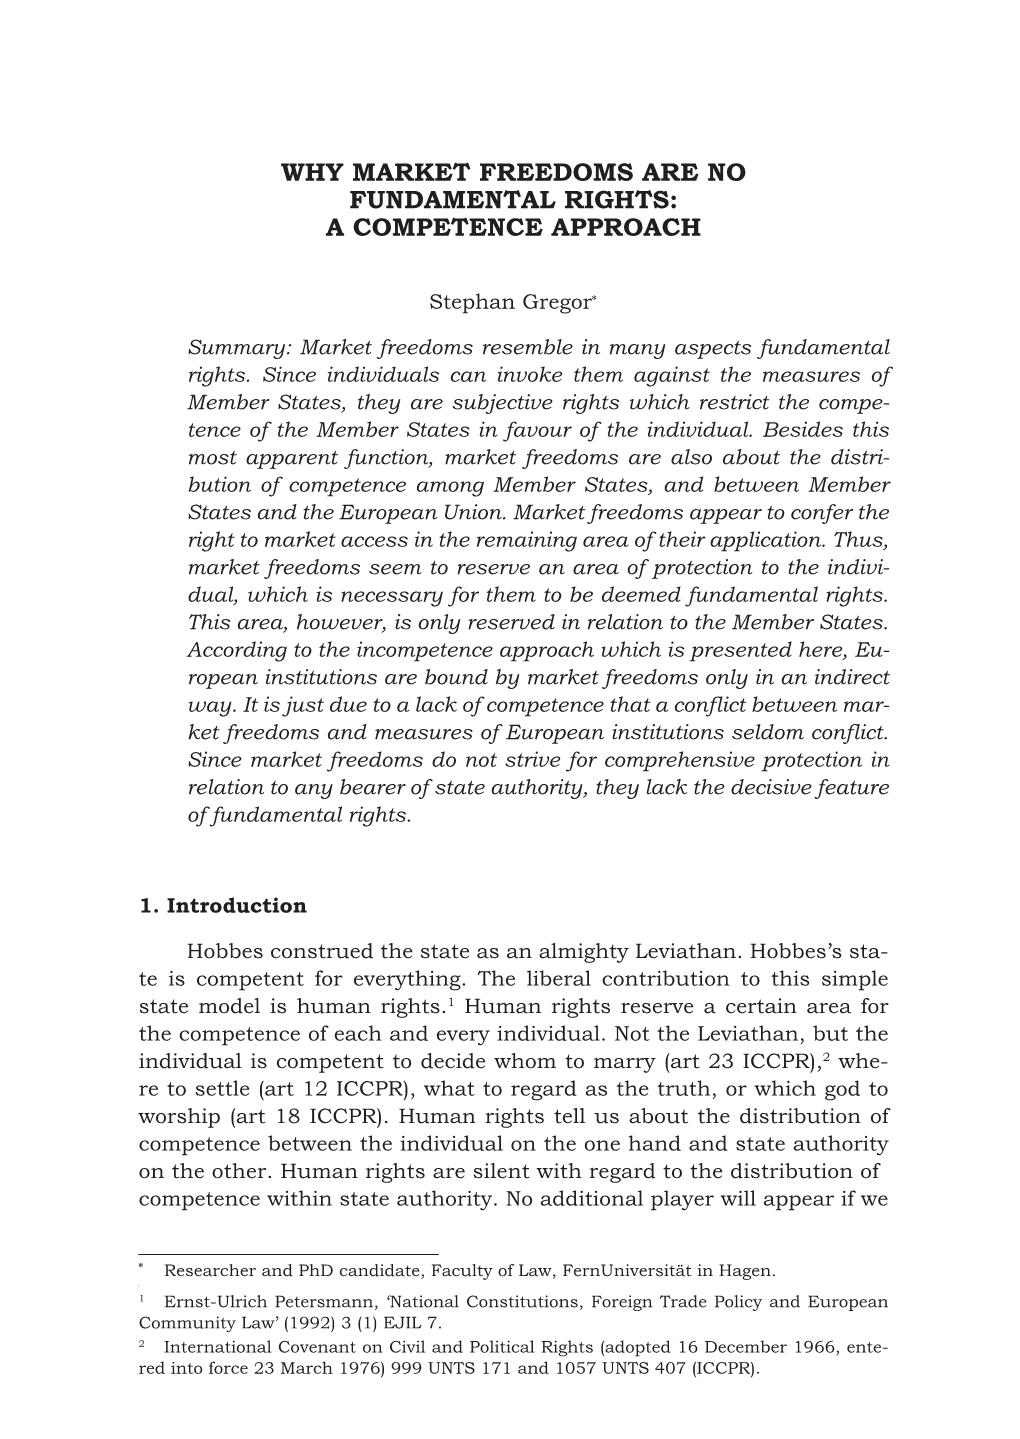 Why Market Freedoms Are No Fundamental Rights: a Competence Approach